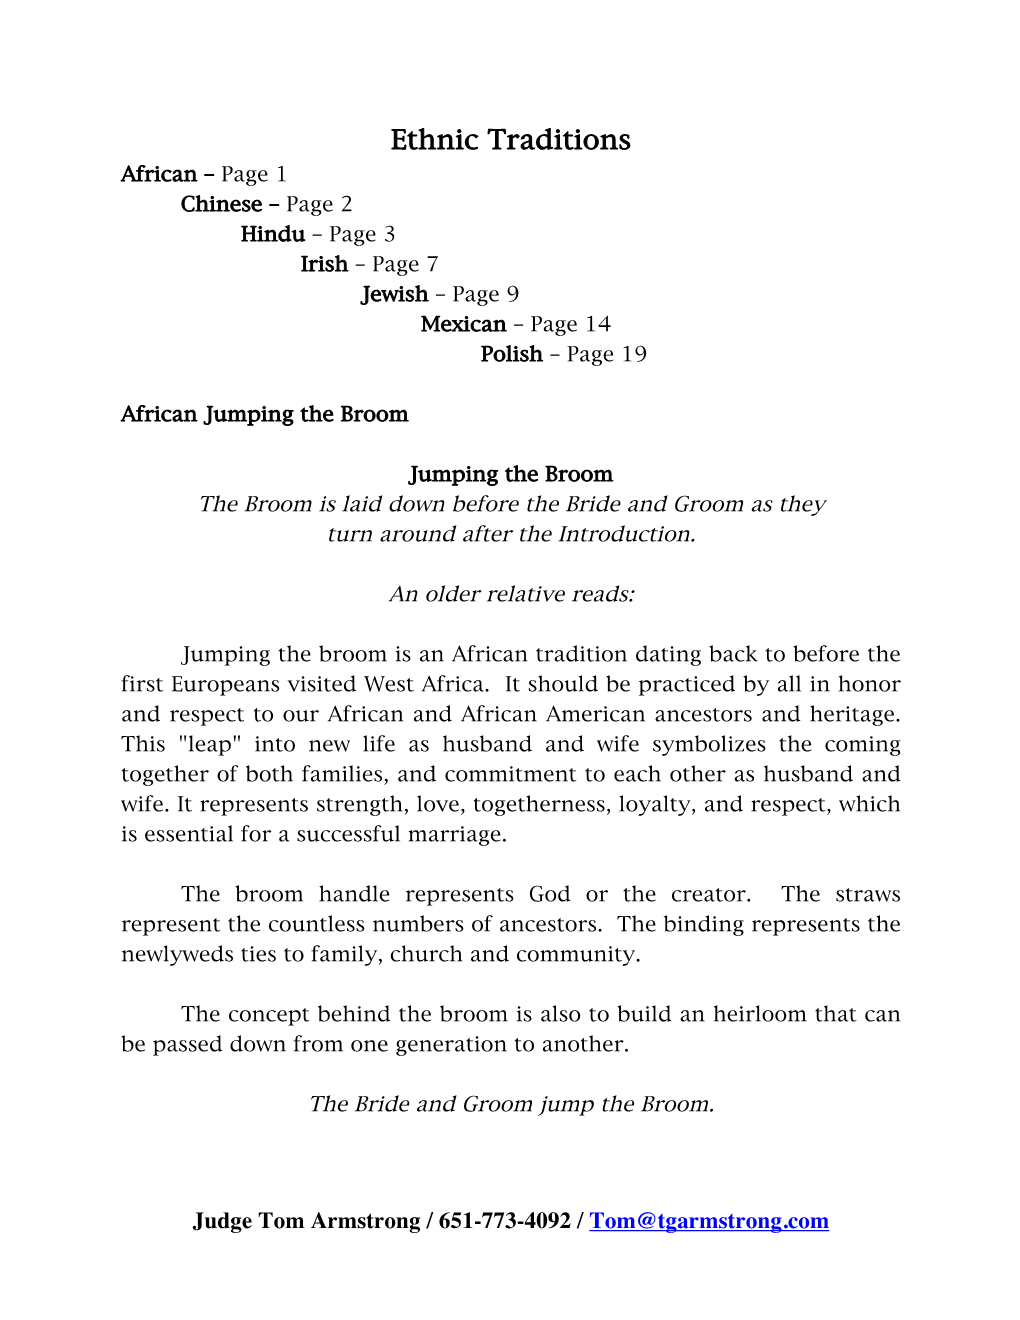 Ethnic Traditions African – Page 1 Chinese – Page 2 Hindu – Page 3 Irish – Page 7 Jewish – Page 9 Mexican – Page 14 Polish – Page 19